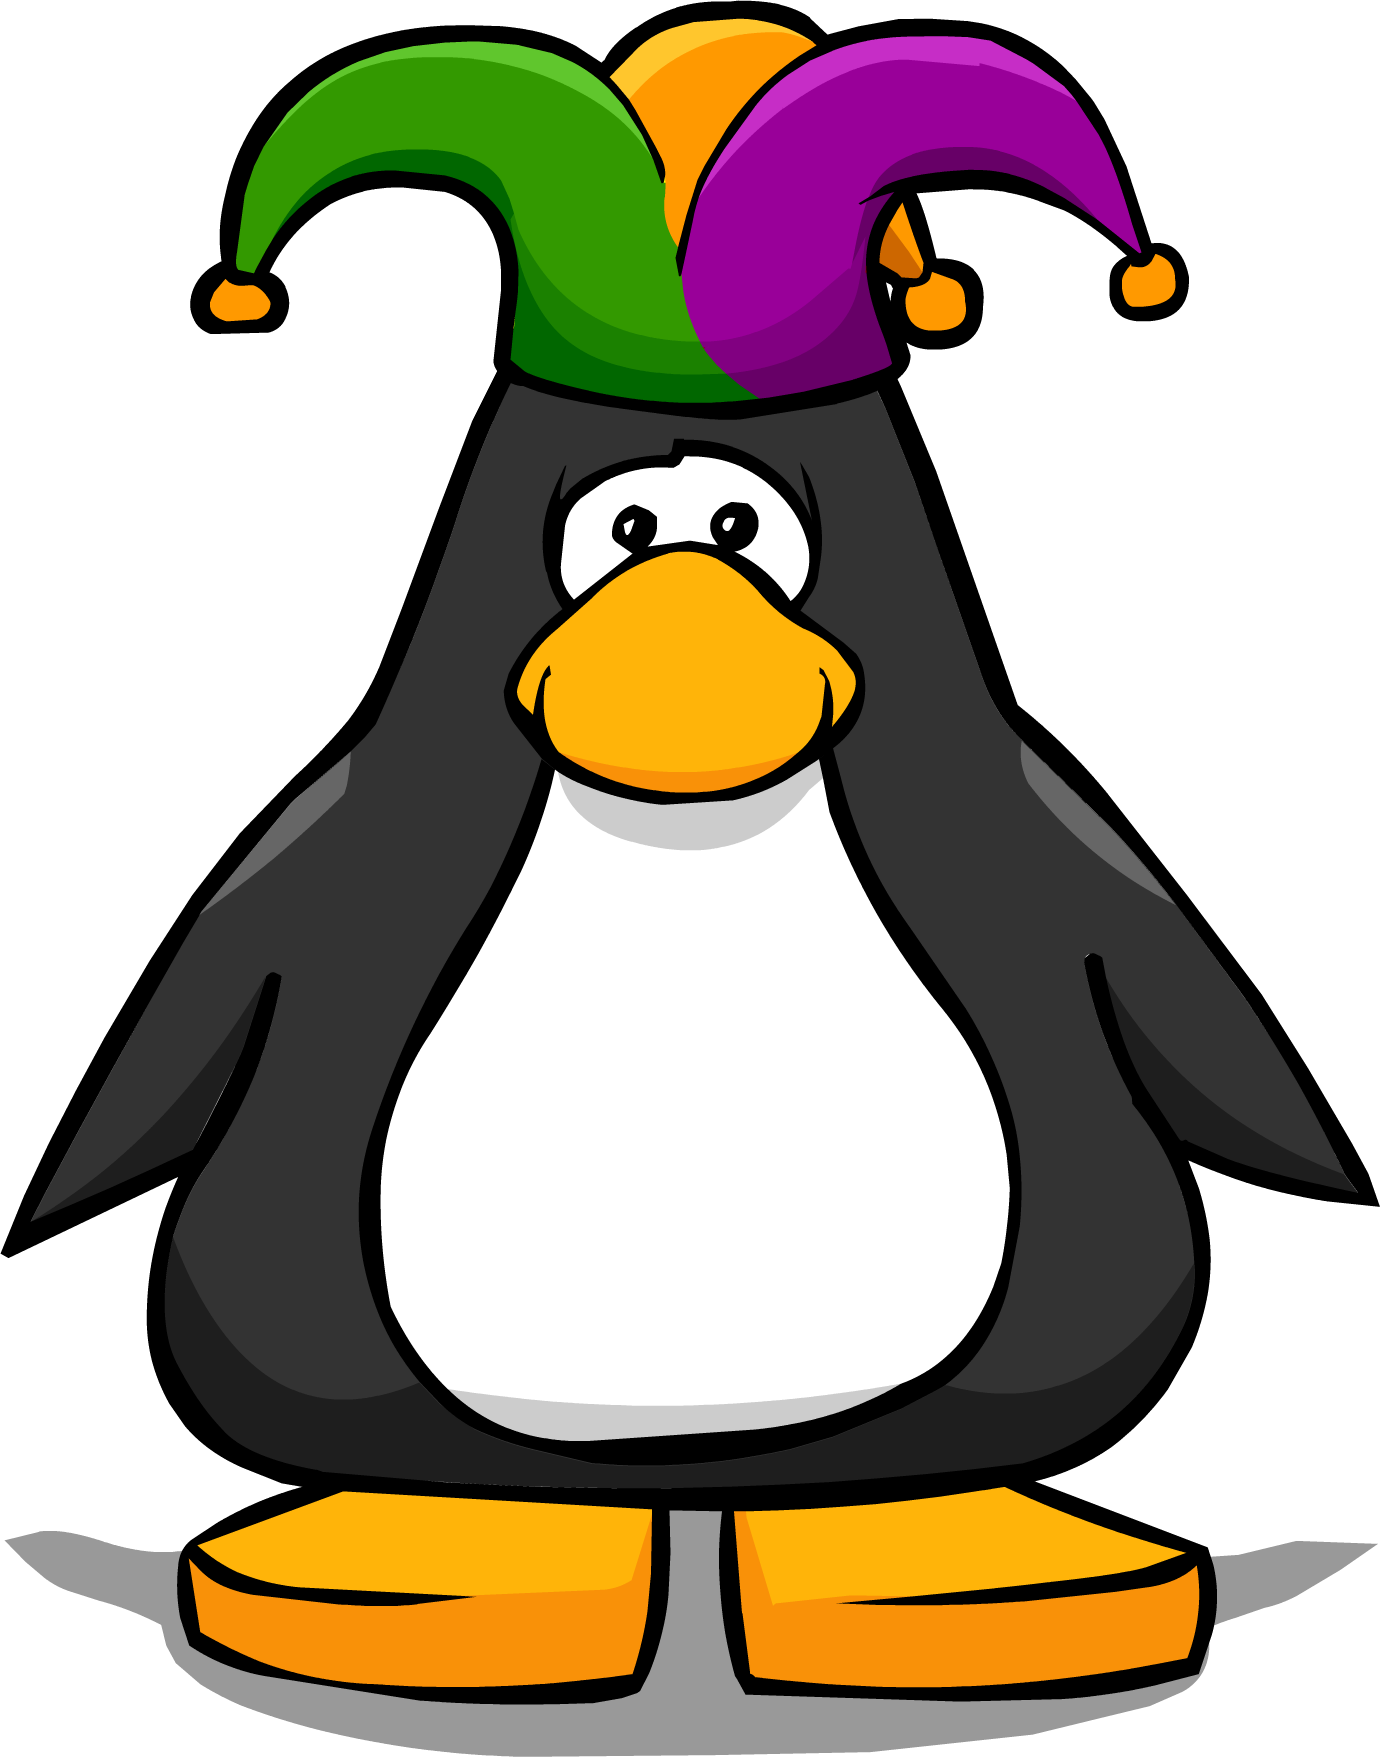 jester hat clipart free - photo #5